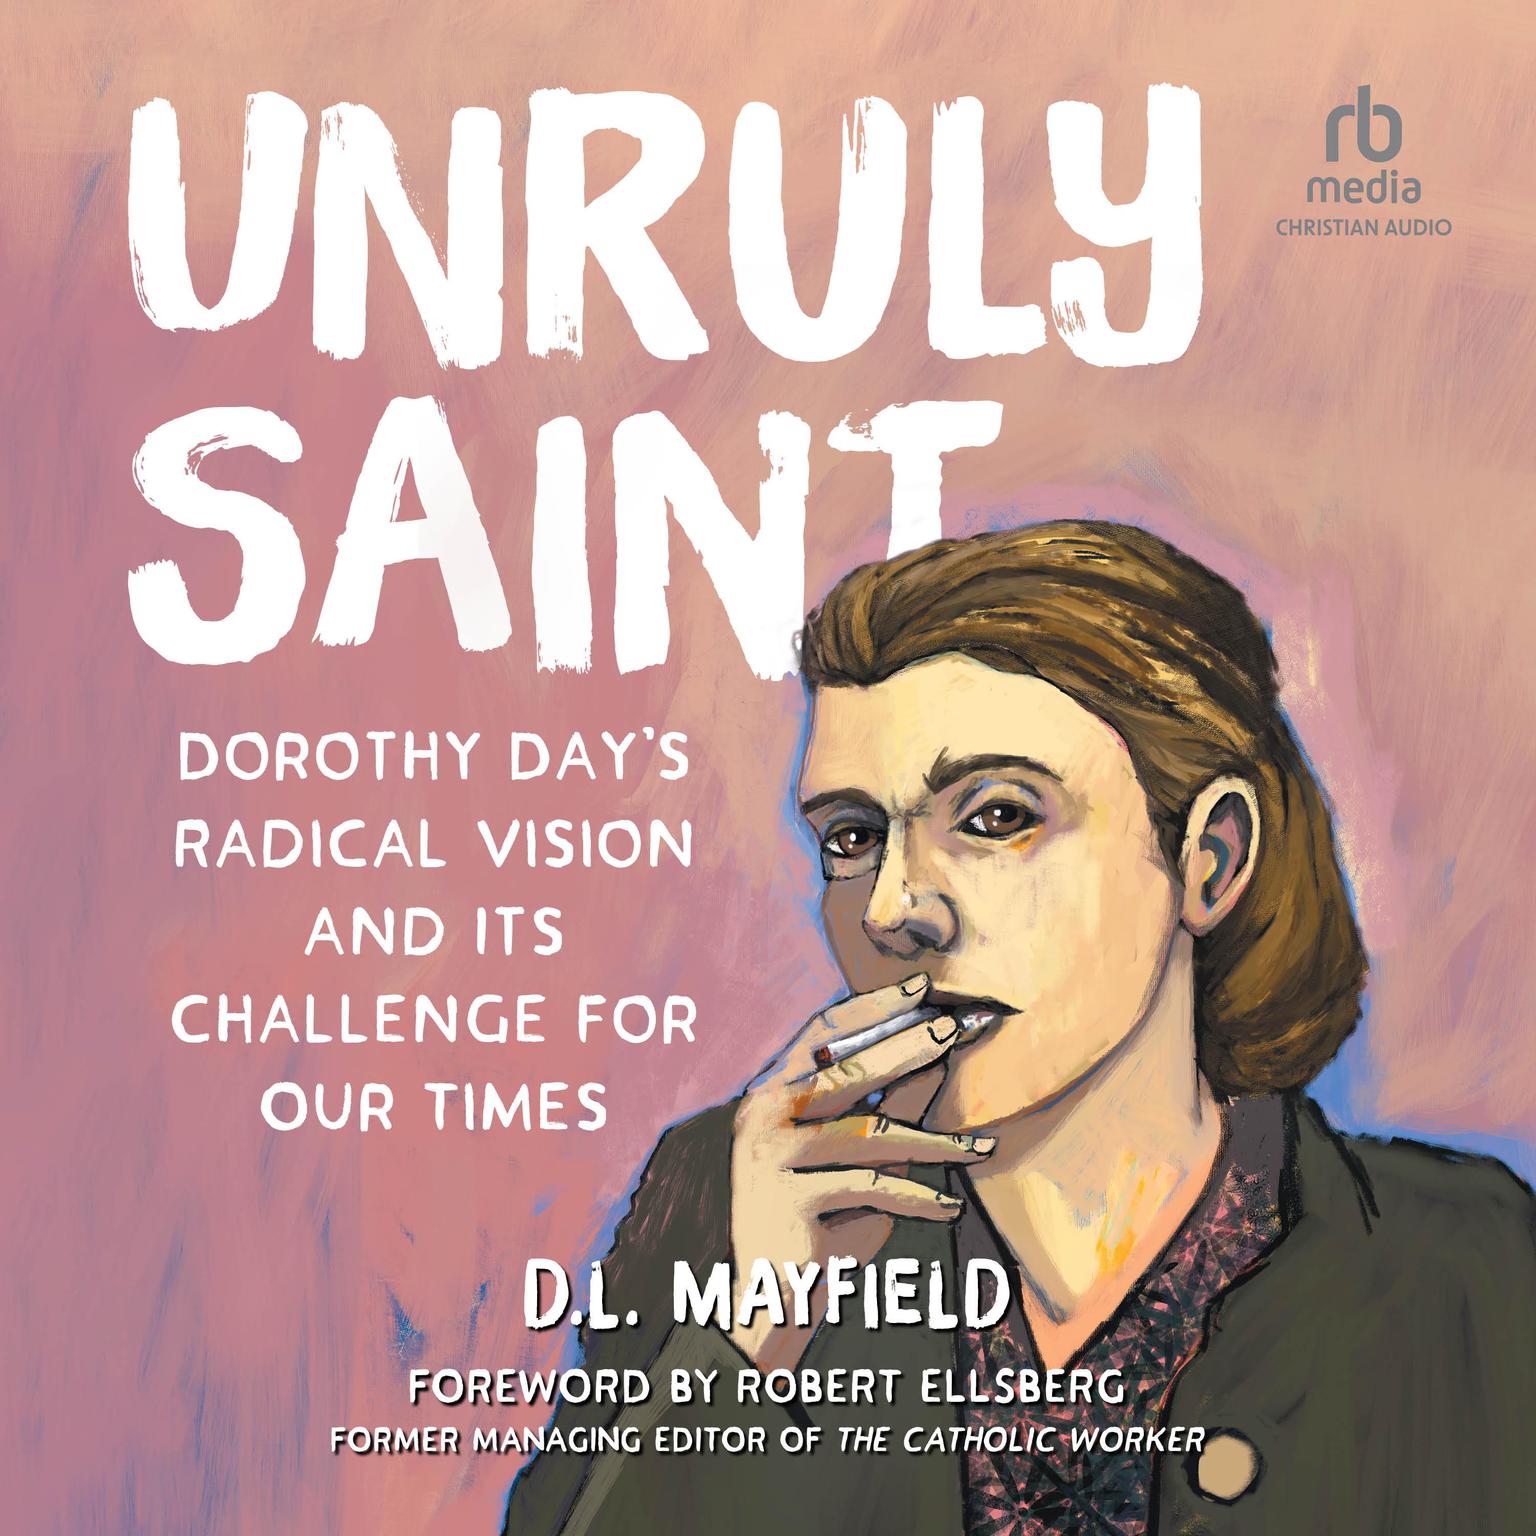 Unruly Saint: Dorothy Days Radical Vision and its Challenge for Our Times Audiobook, by D.L. Mayfield